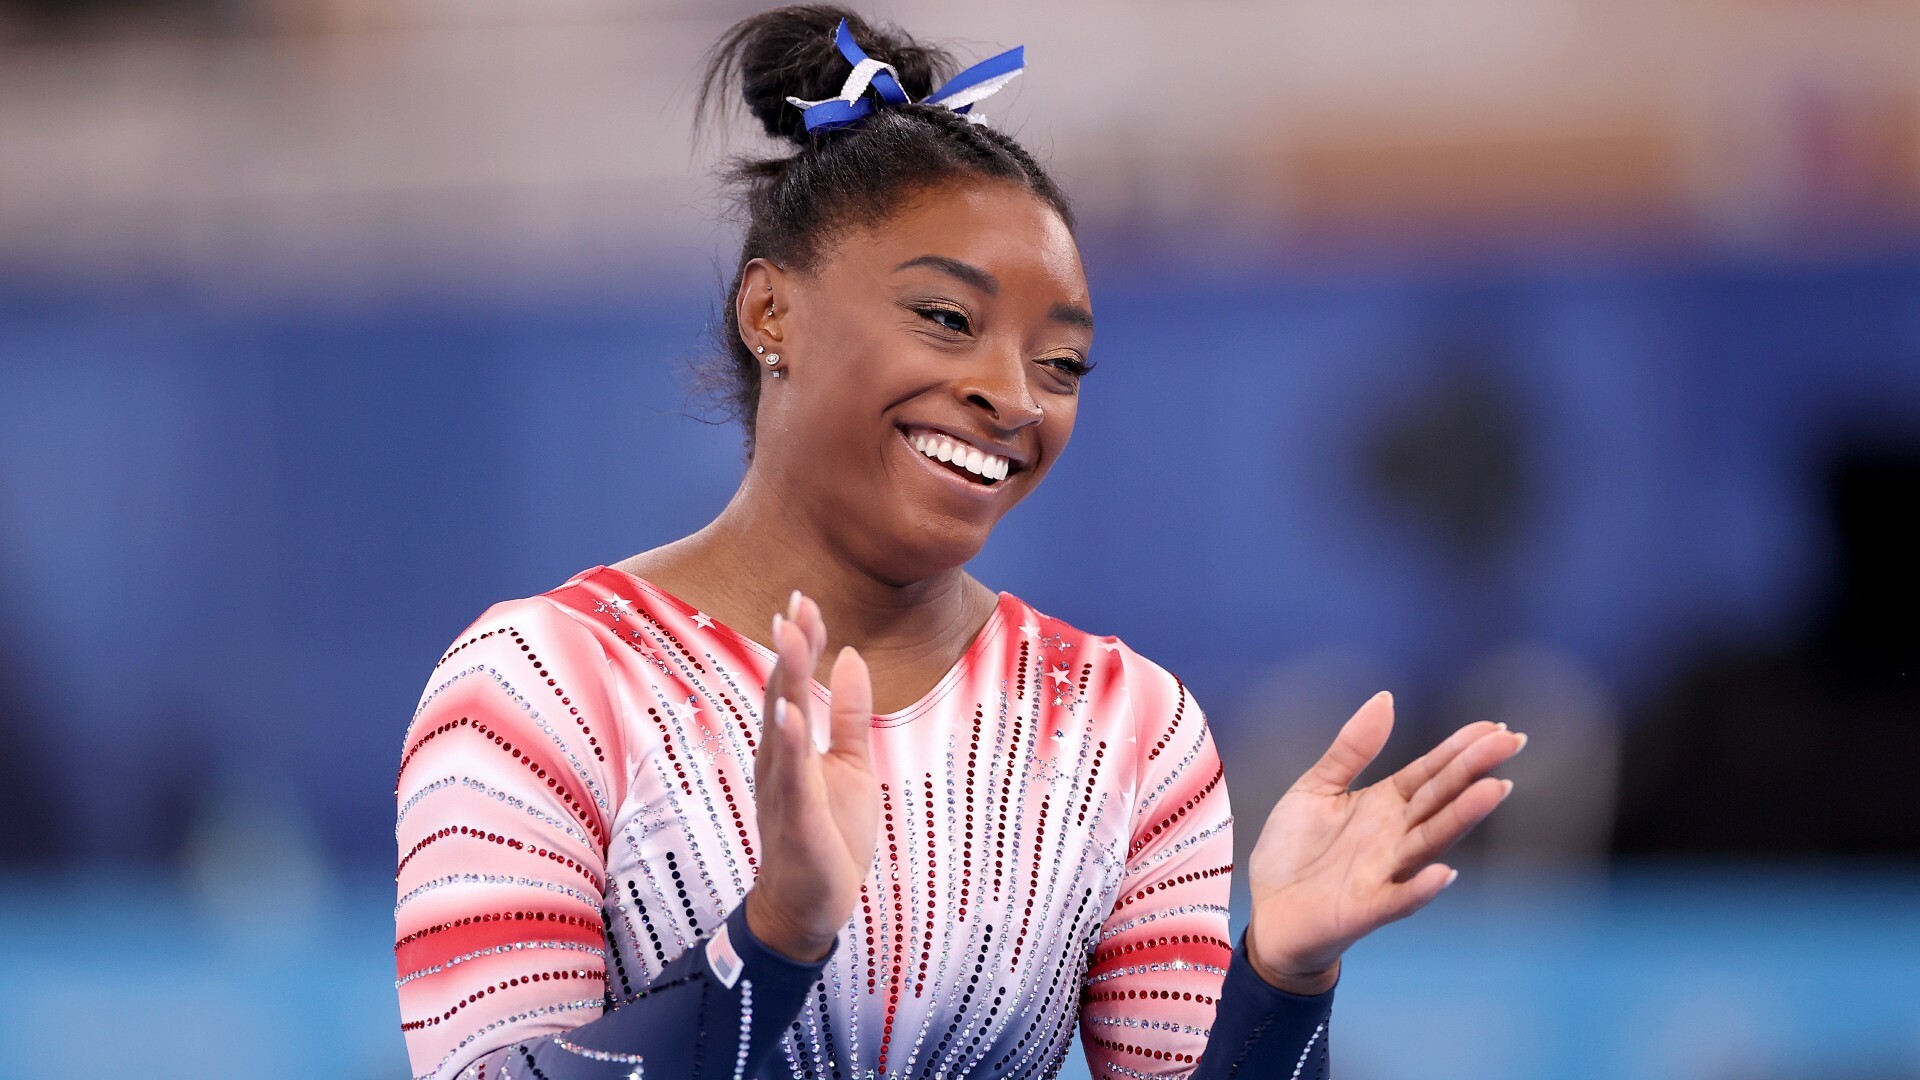 Simone Biles: She placed first on floor exercise at the 2019 GK US Classic. 1920x1080 Full HD Wallpaper.